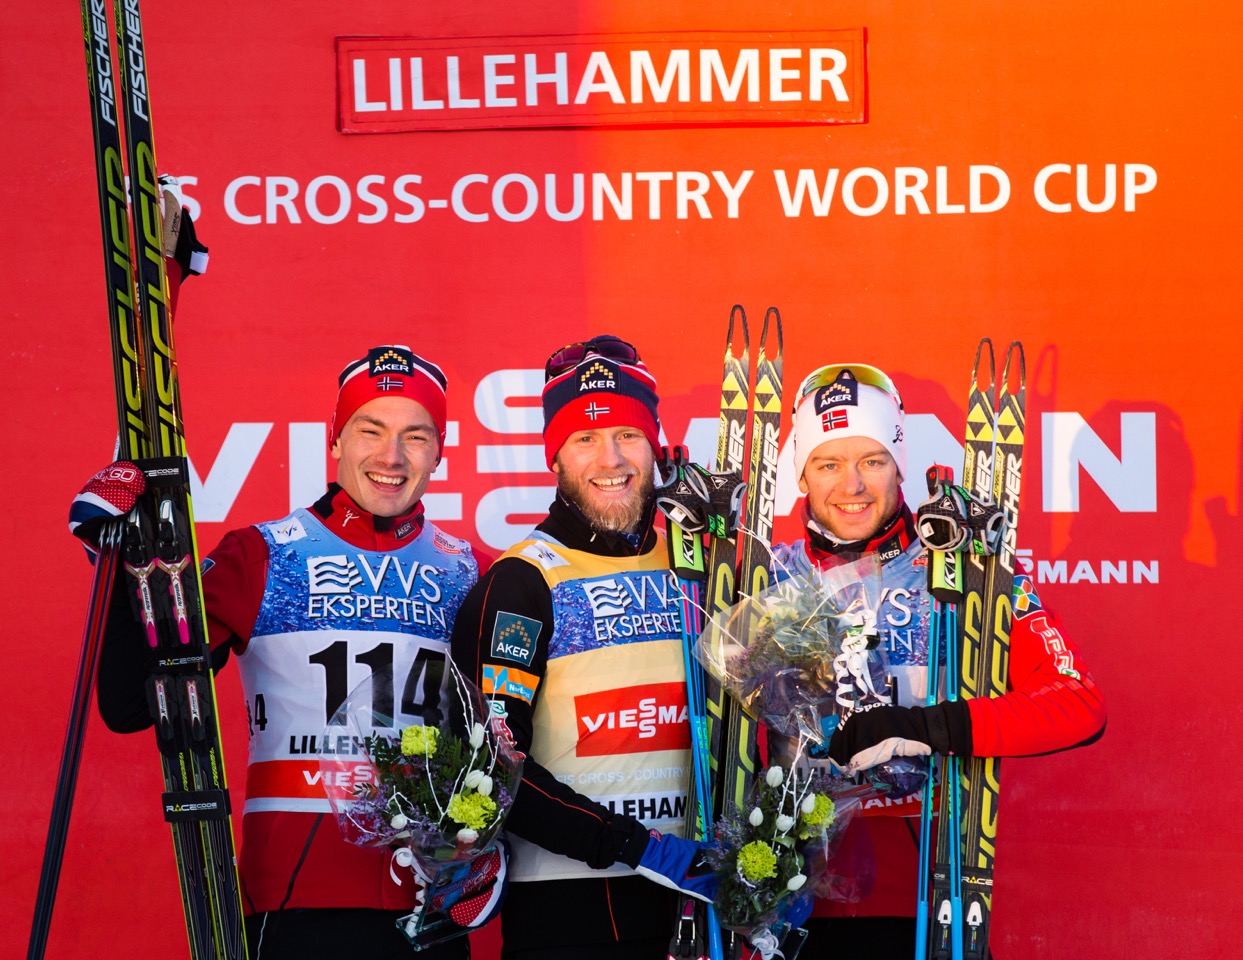 The men's podiums on Day 2 and 3 of the Lillehammer World Cup were exactly the same, with three Norwegians (as pictured after Saturday's 10 k freestyle). On Sunday, Martin Johnsrud Sundby (c) repeated in first for his fourth-consecutive mini-tour win, Finn Hågen Krogh was second (l), and Sjur Røthe third. (Photo: Fischer/NordicFocus)